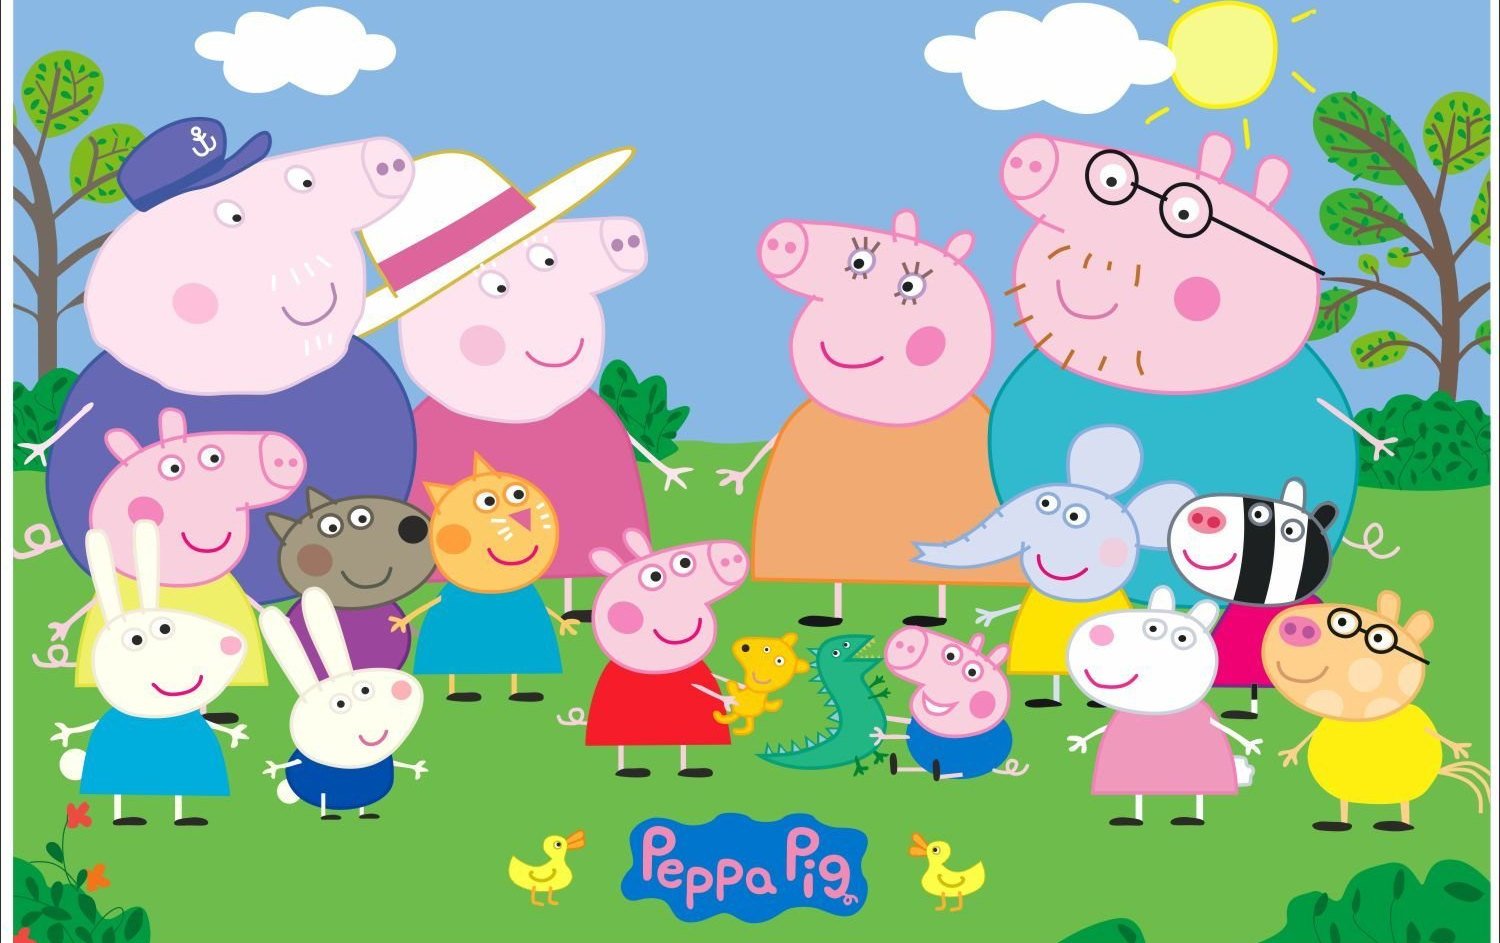 Peppa Pig Family Wallpapers.